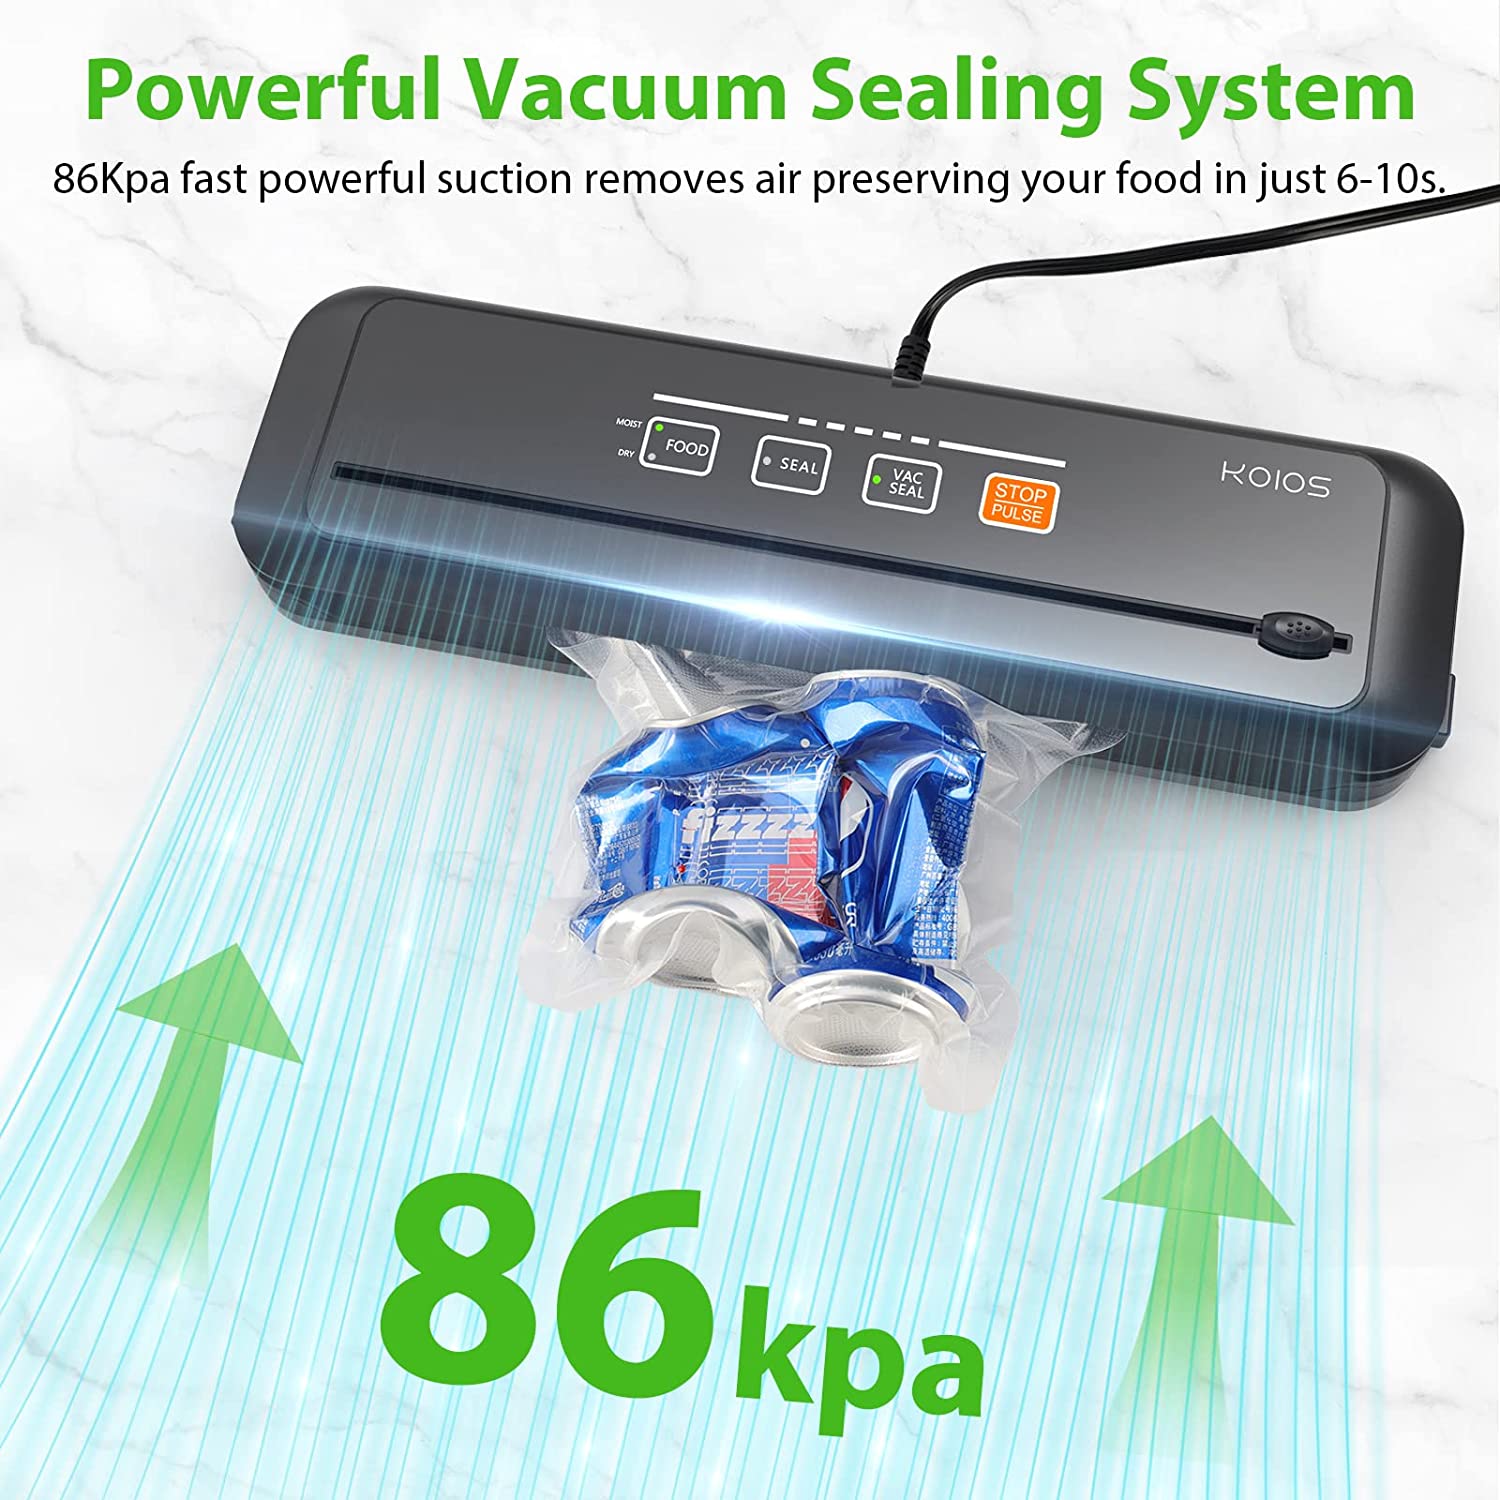  Vacuum Sealer Machine, KOIOS Automatic Food Sealer with Cutter,  Dry & Moist Modes, Compact Design Powerful Suction Air Sealing System with  10 Sealing Bags & Air Suction Hose: Home & Kitchen